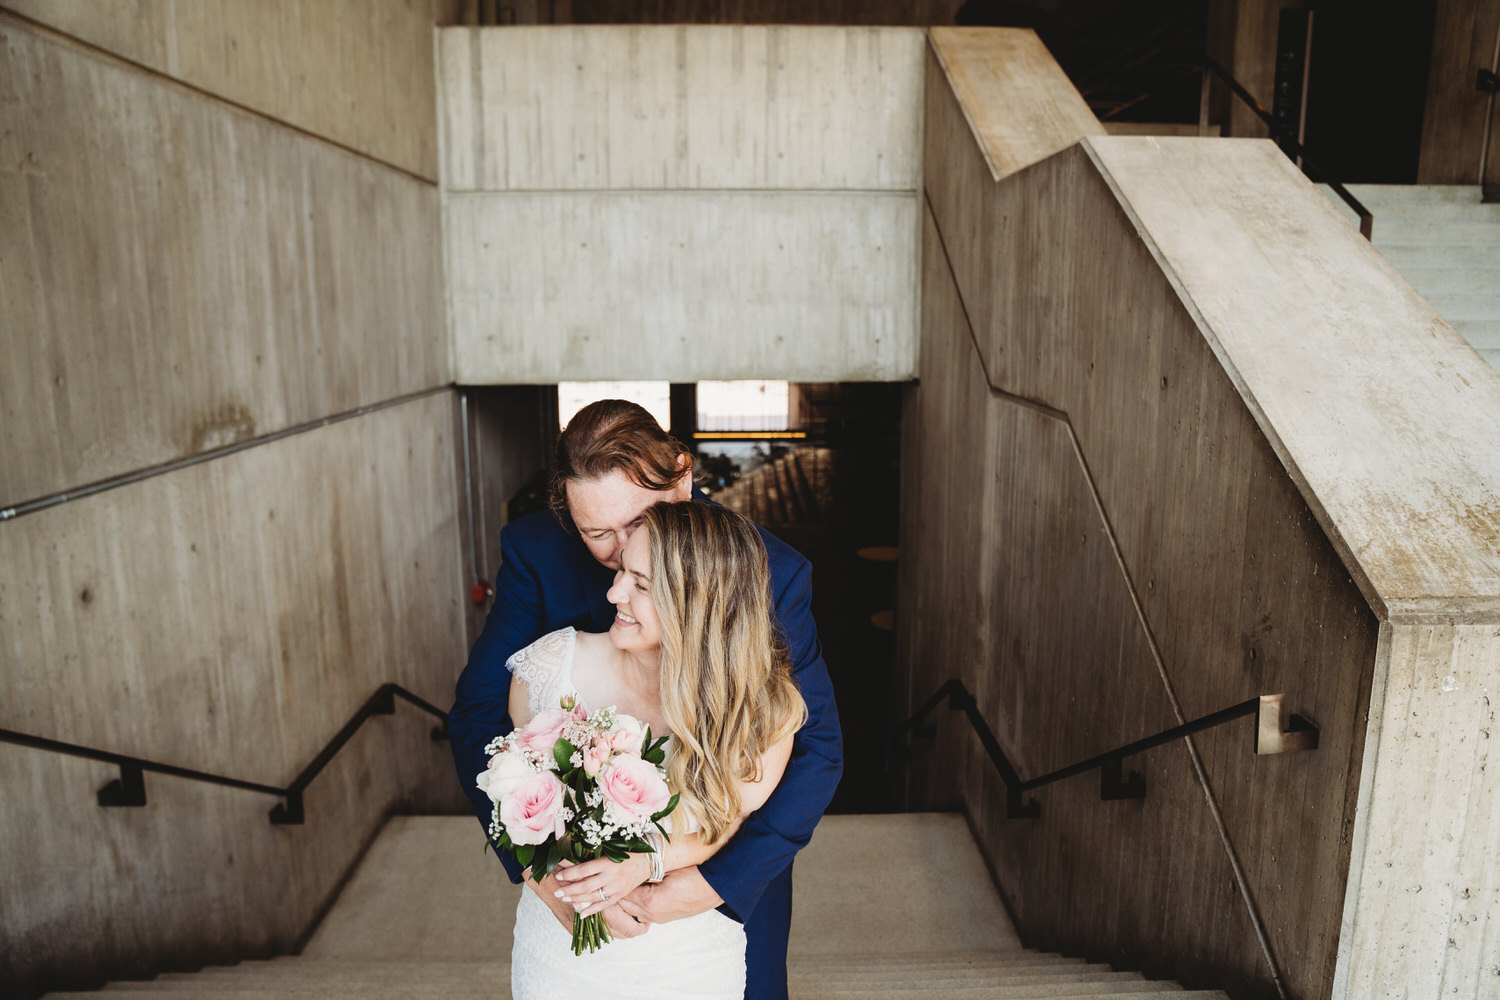 A bride and groom hugging on the steps of Boston City Hall after their wedding.